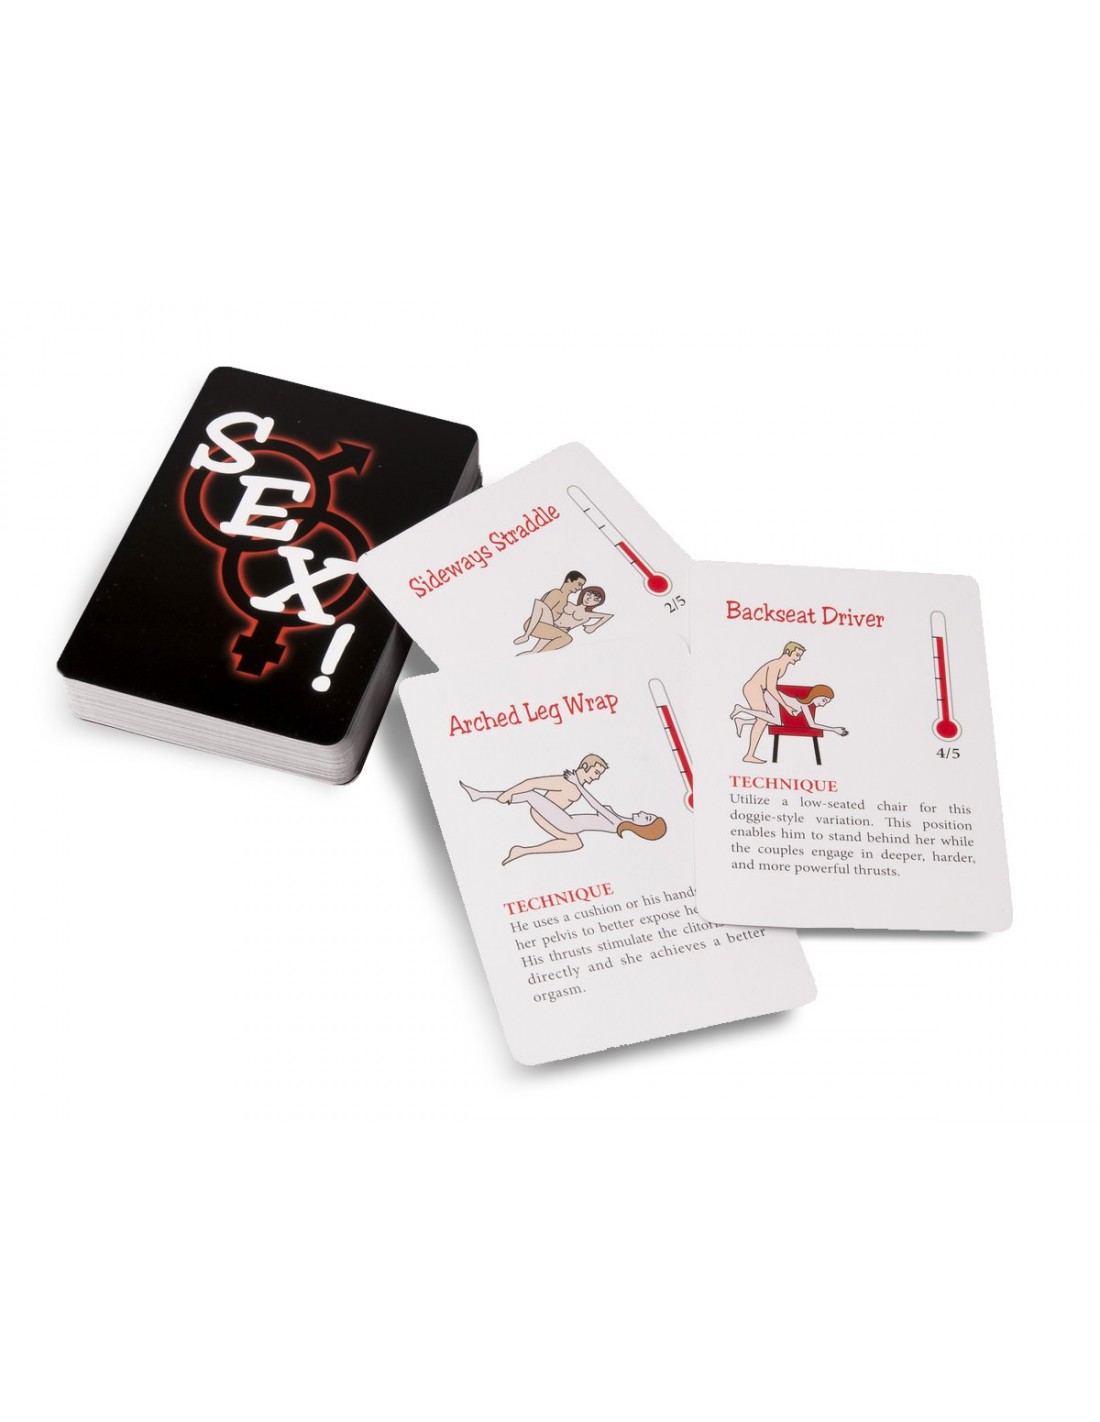 Sex Games With Playing Cards